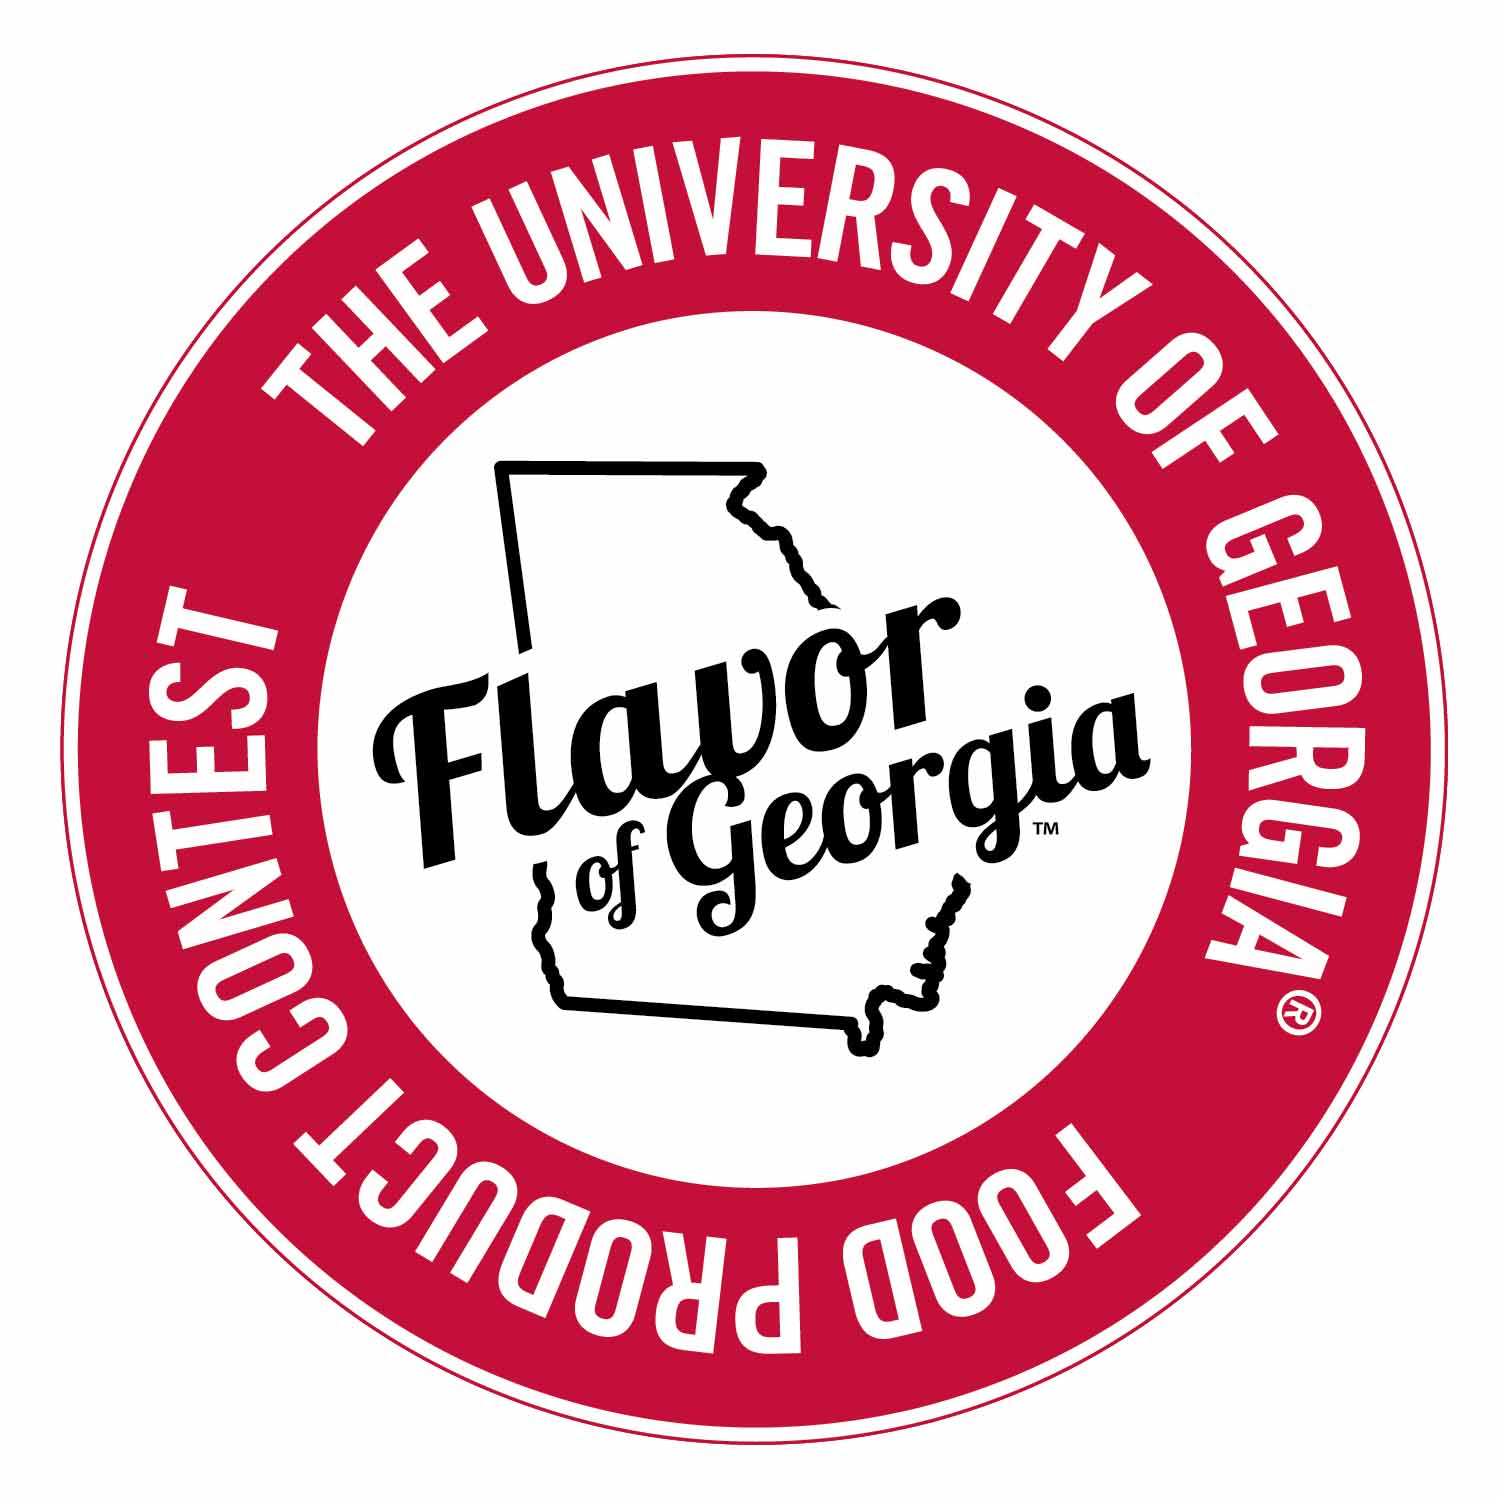 A team of food industry experts and grocery buyers selected 33 products to compete in the final round of the University of Georgia's 2019 Flavor of Georgia Food Product Contest.